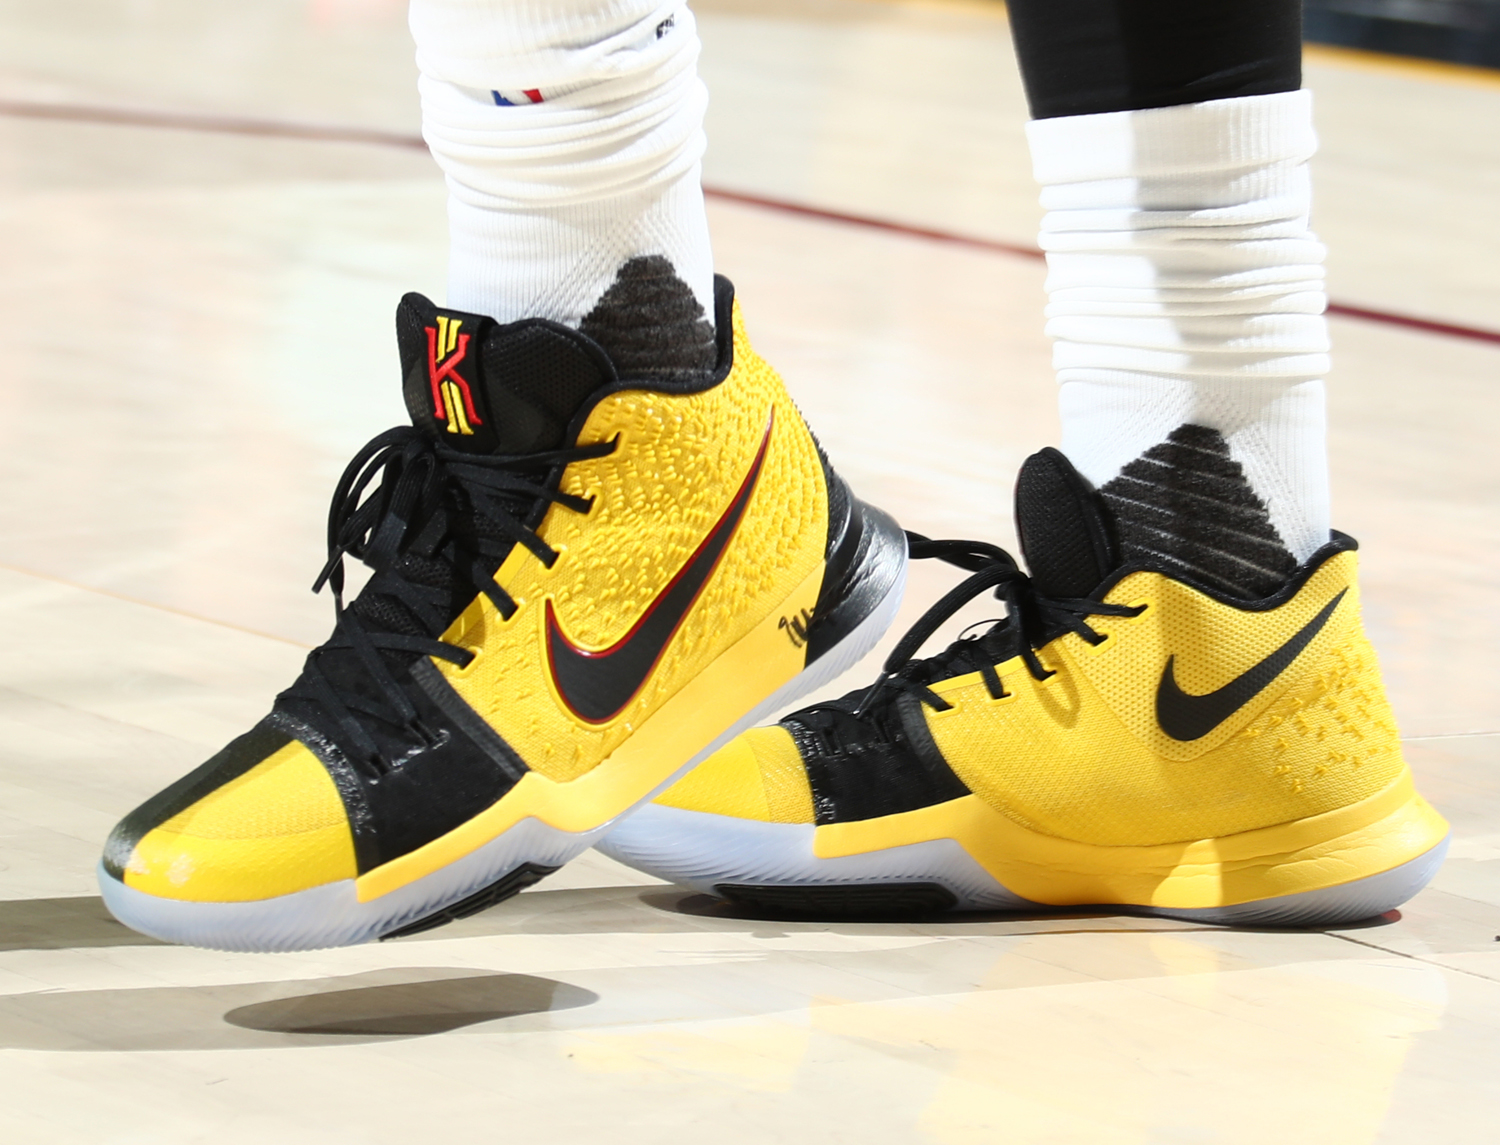 kyrie irving clothing lebron shoes for sale